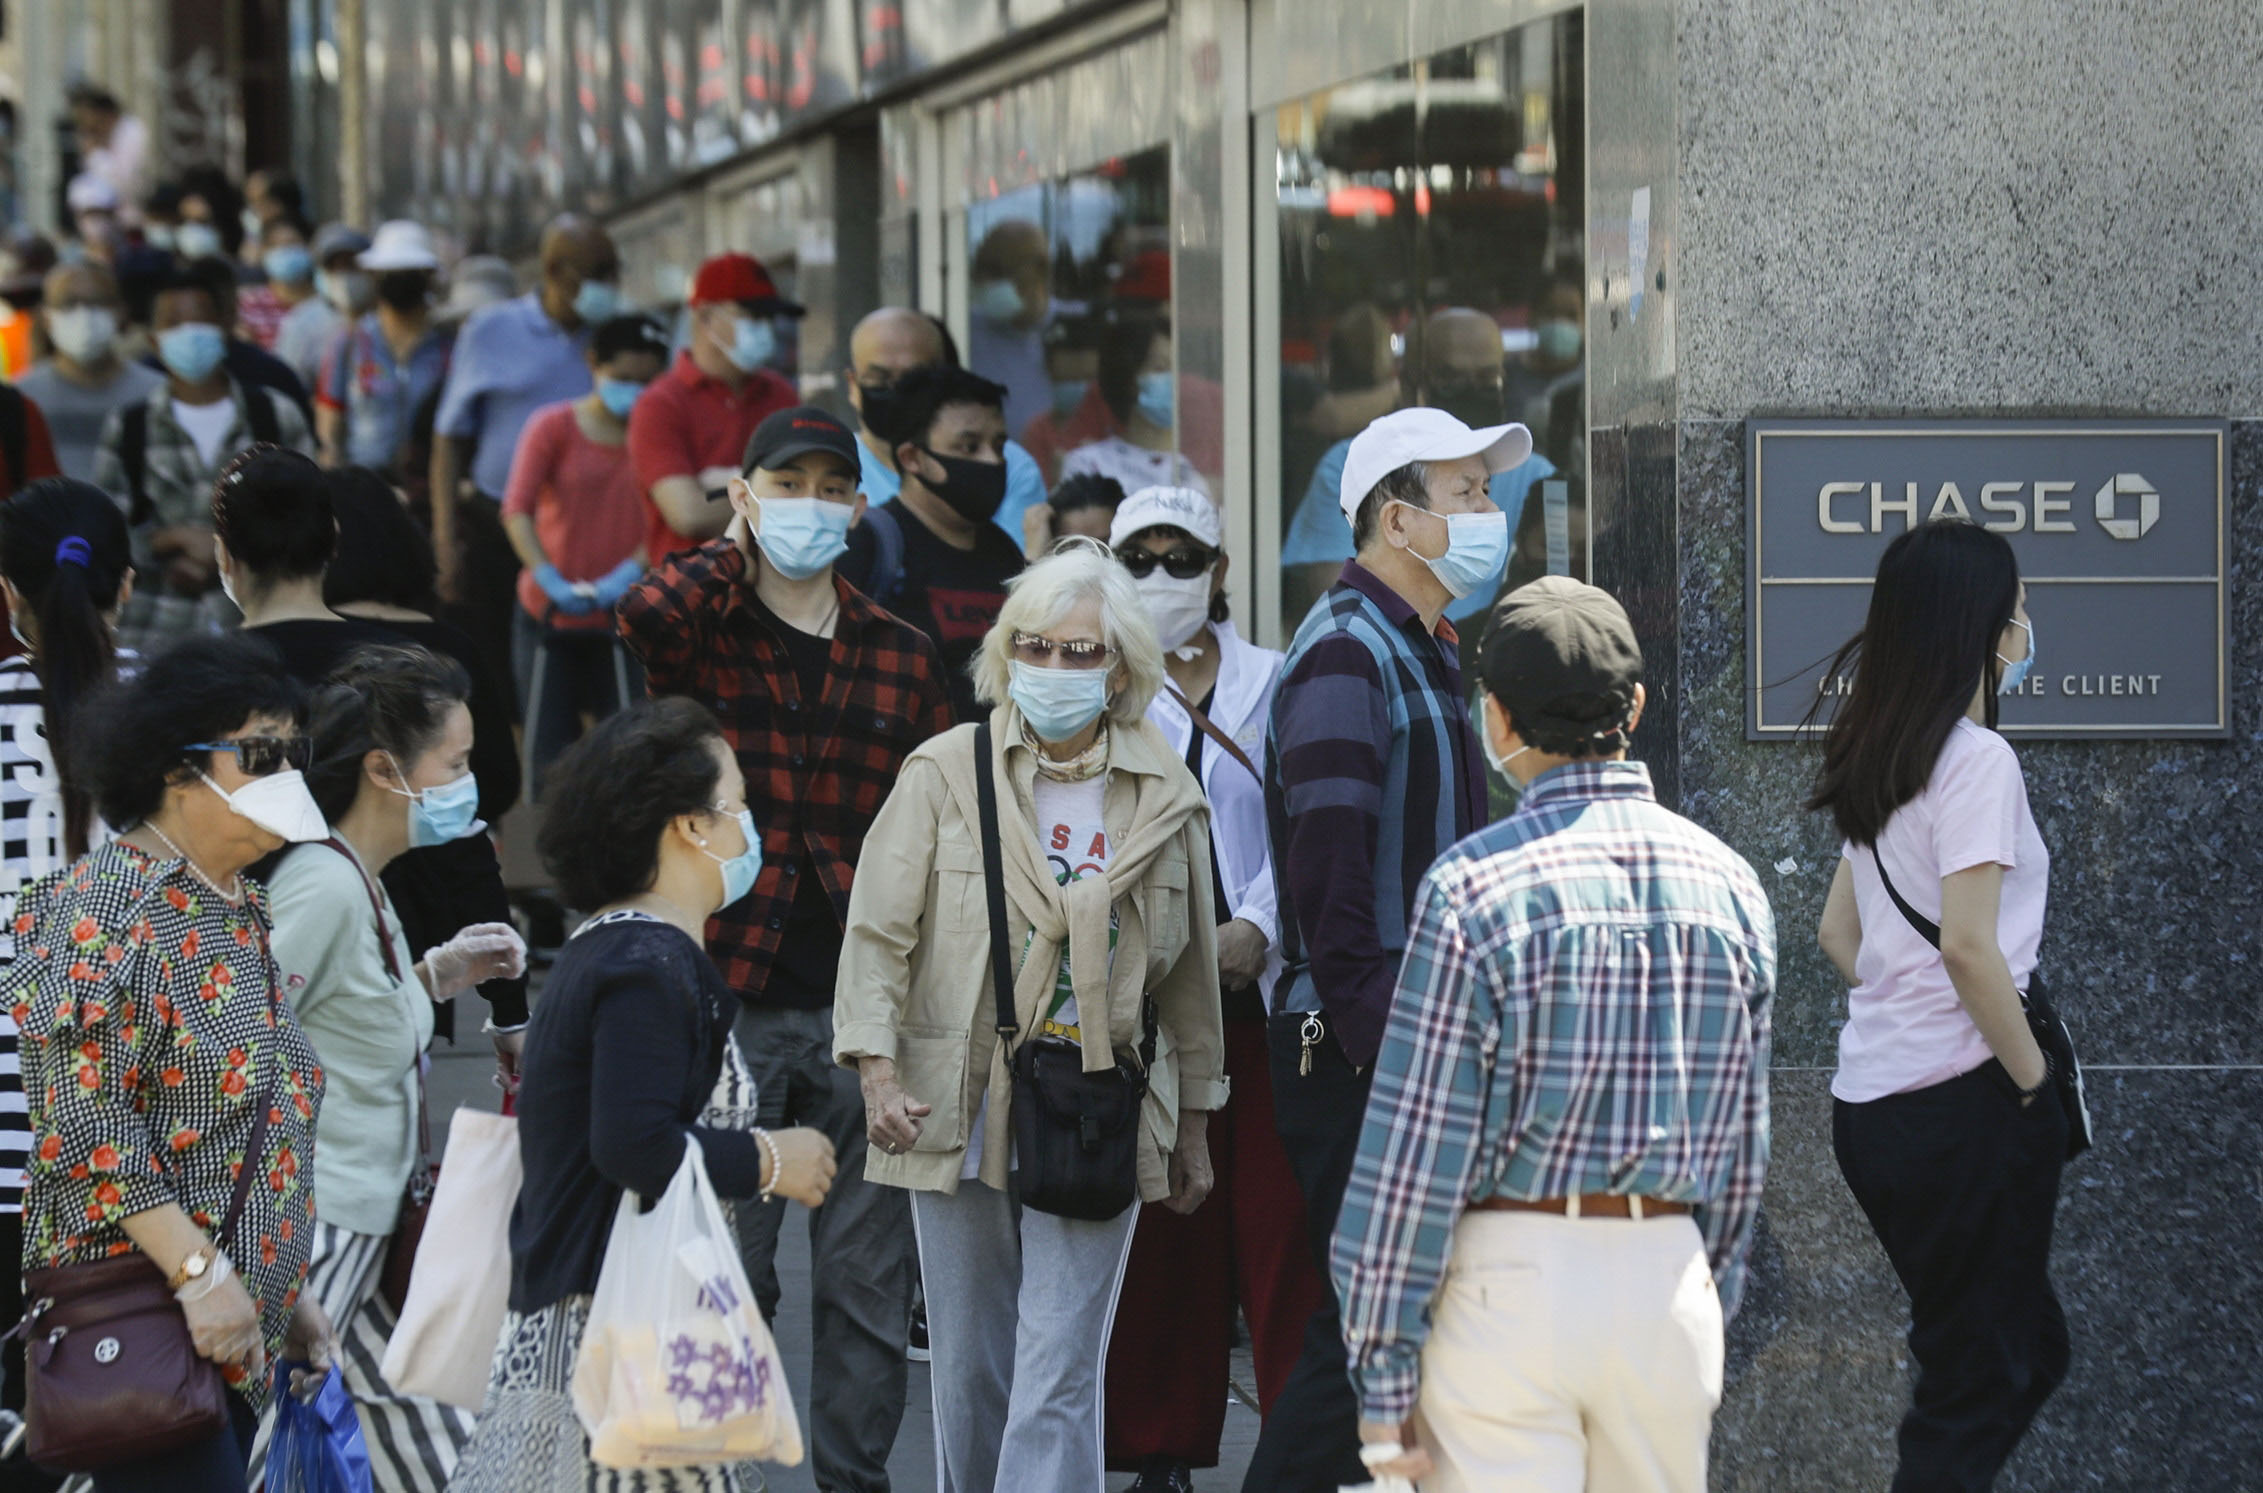 PHOTO: Patrons wearing protective masks wait to enter a Chase bank location, June 8, 2020, in the Queens borough of New York. After three bleak months, New York City will try to turn a page and begin reopening Monday after getting hit by the coronavirus.